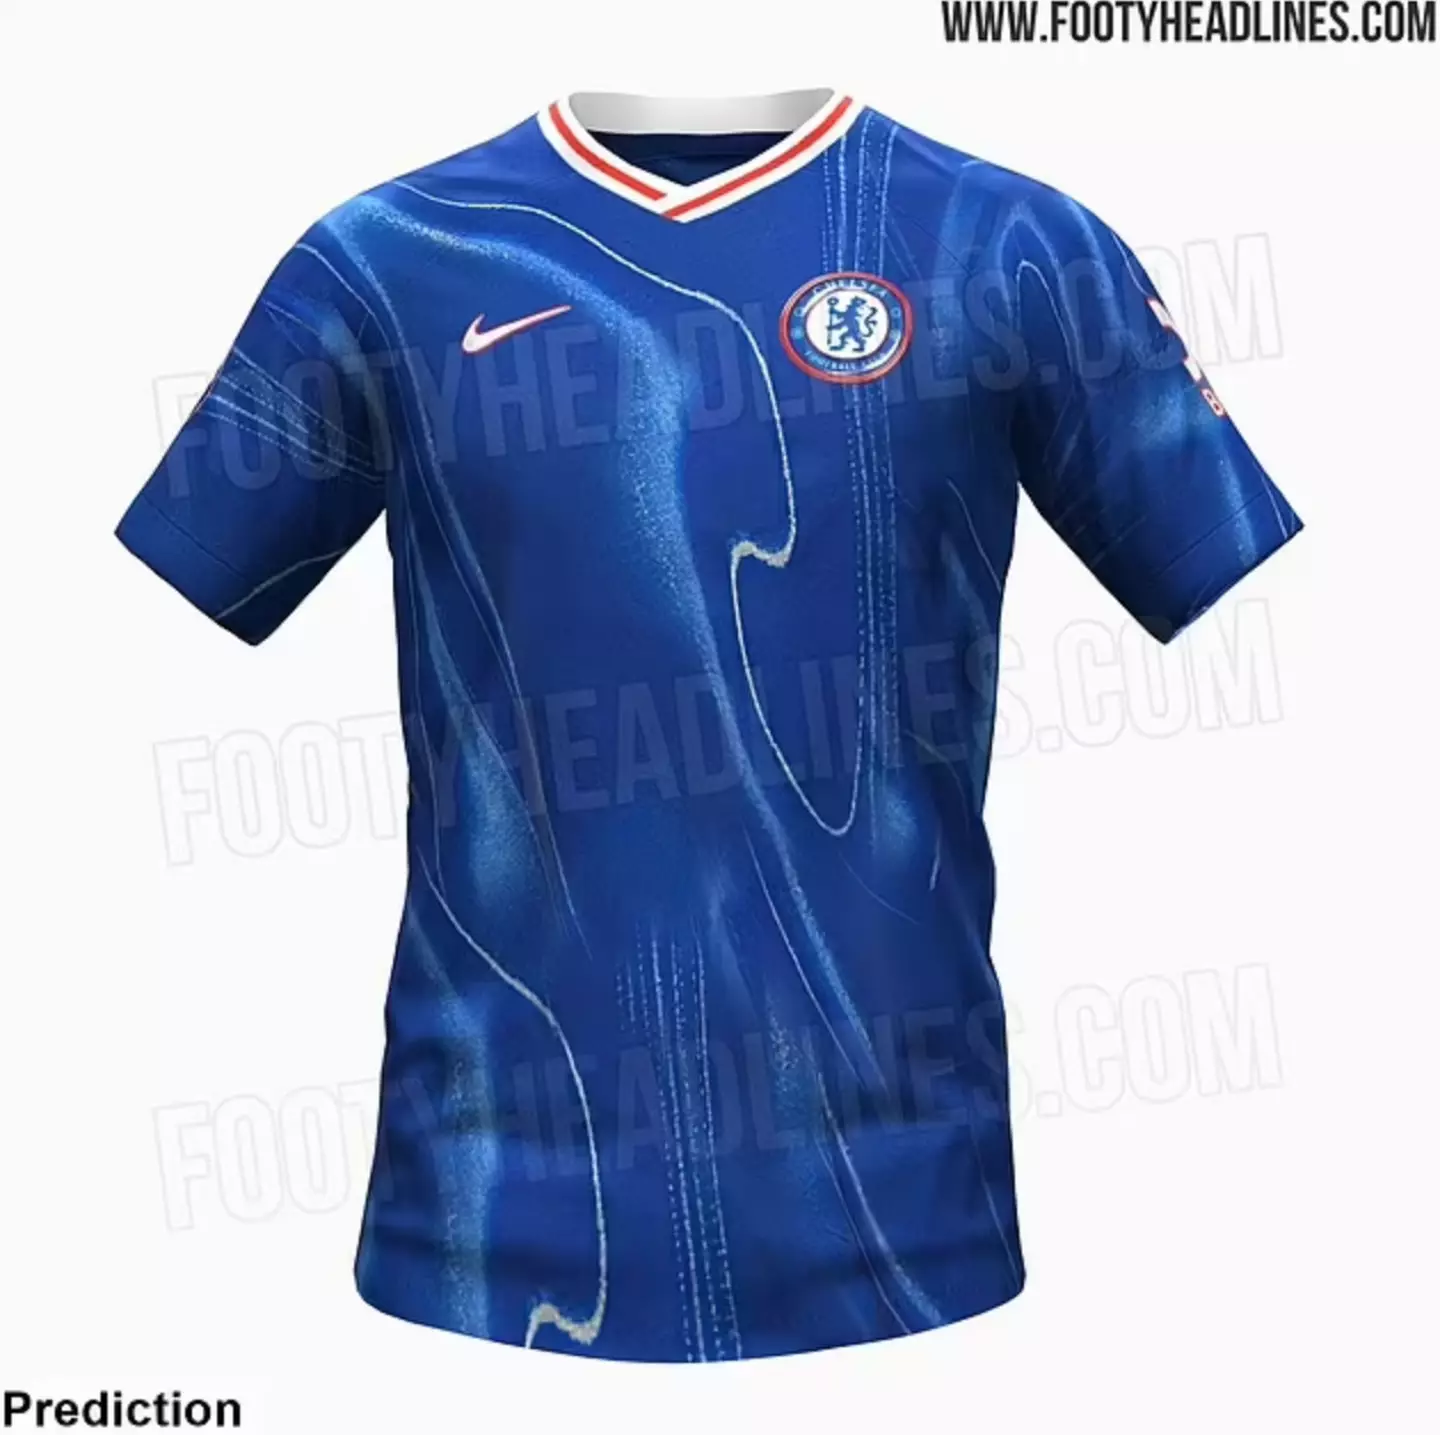 Chelsea's shirt will divide opinion. (Image